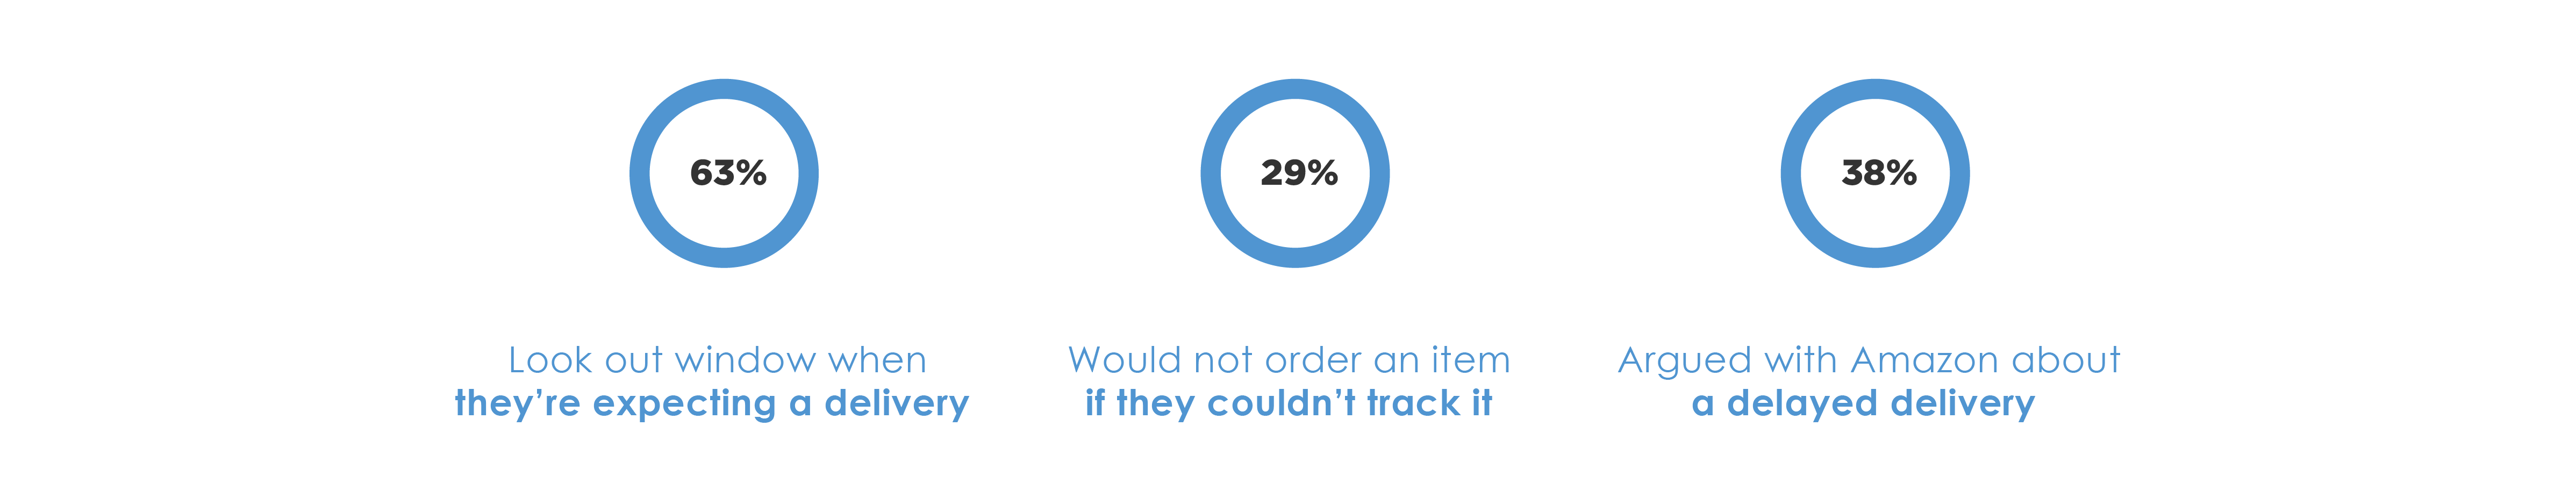 Delivery Tracking Statistics Figure 2-1